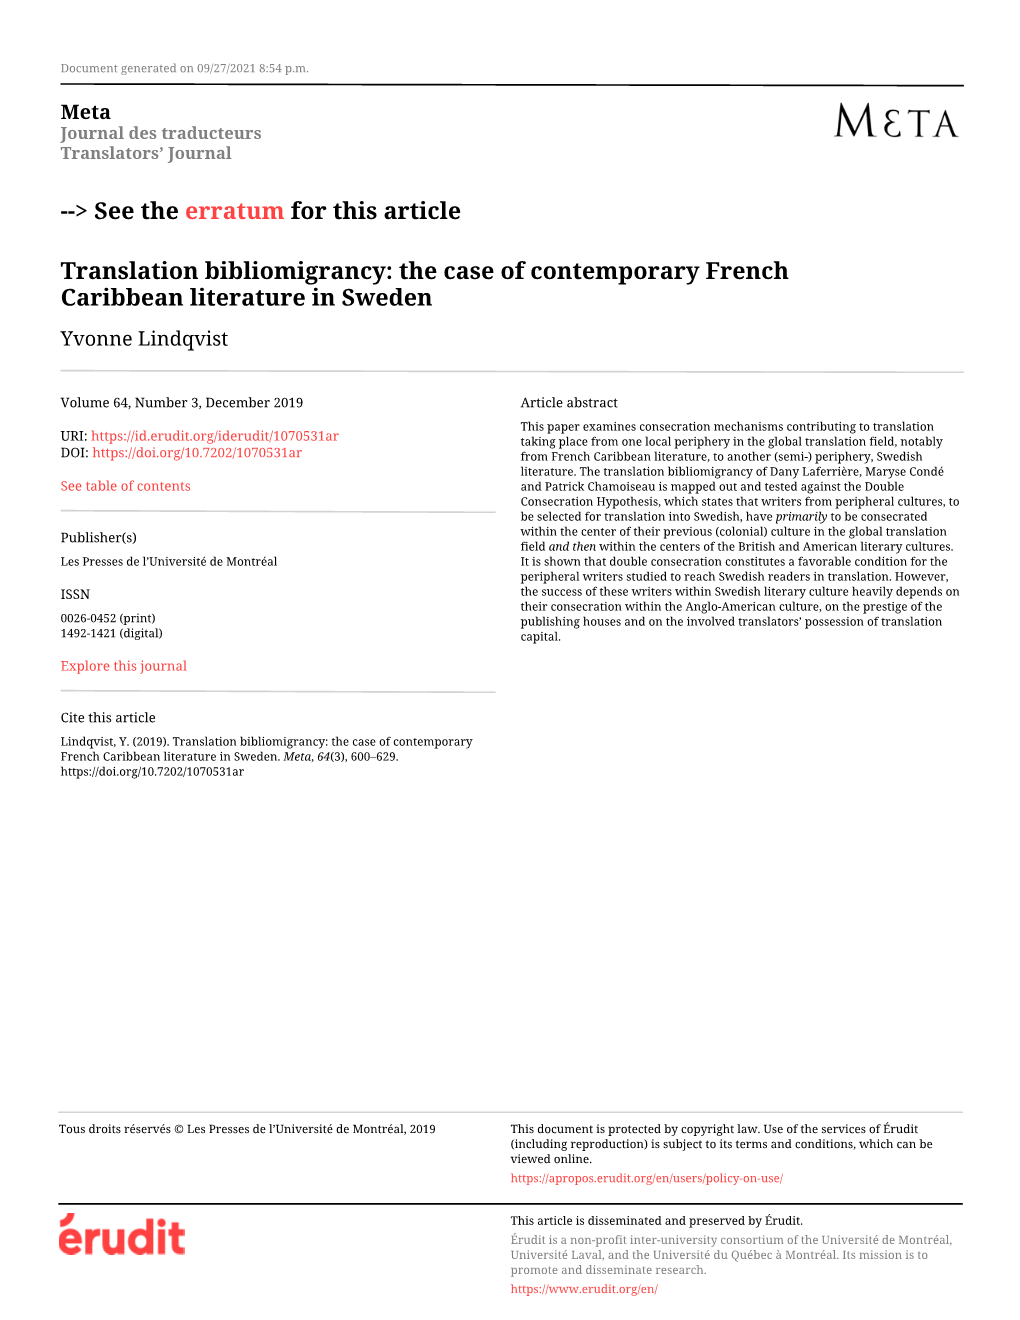 Translation Bibliomigrancy: the Case of Contemporary French Caribbean Literature in Sweden Yvonne Lindqvist